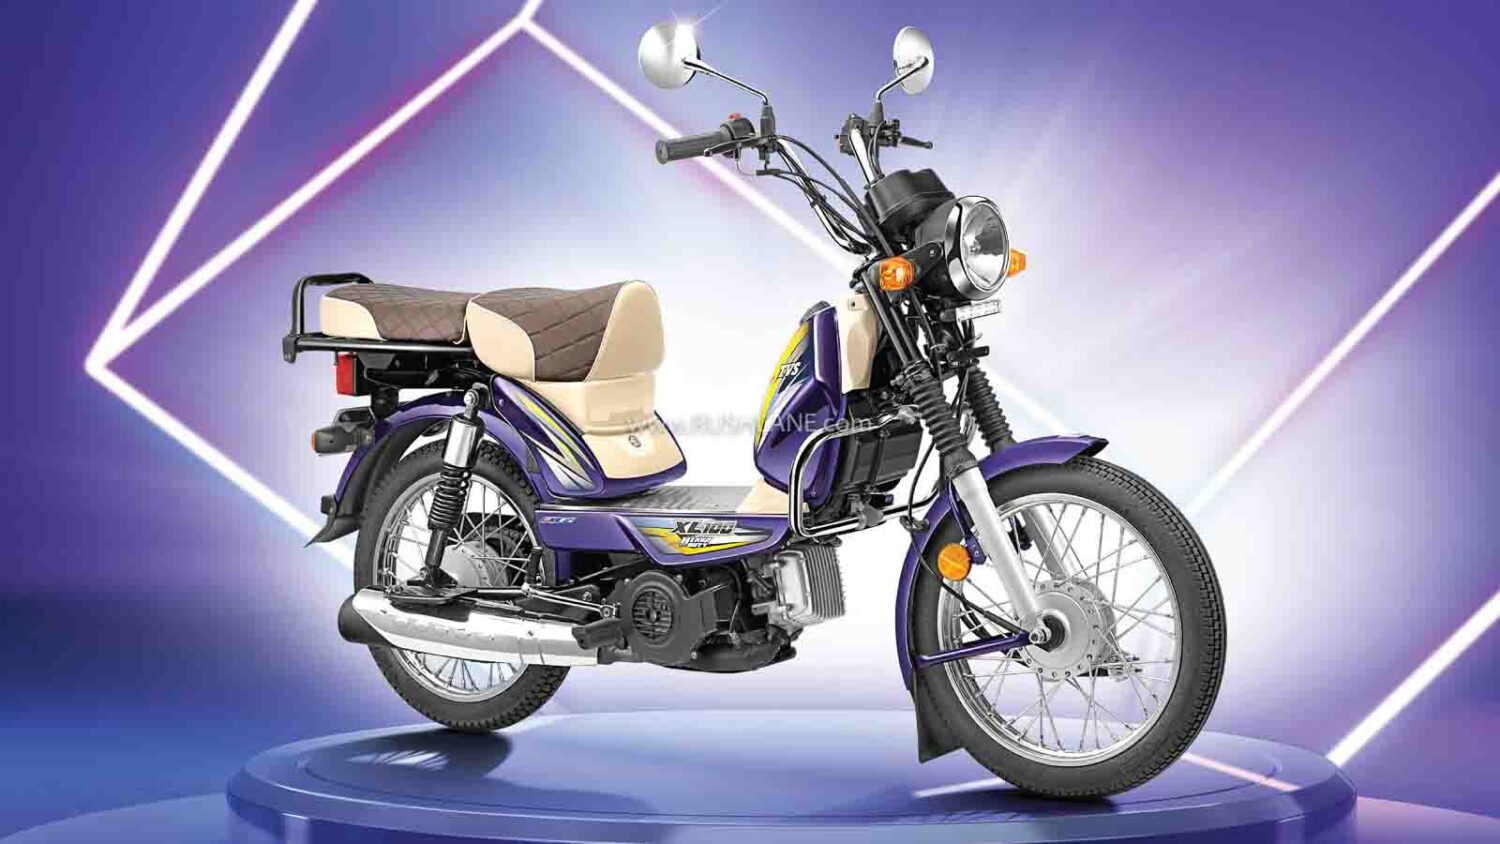 TVS Launches Winner Edition Of Their Best Selling Two Wheeler XL 100